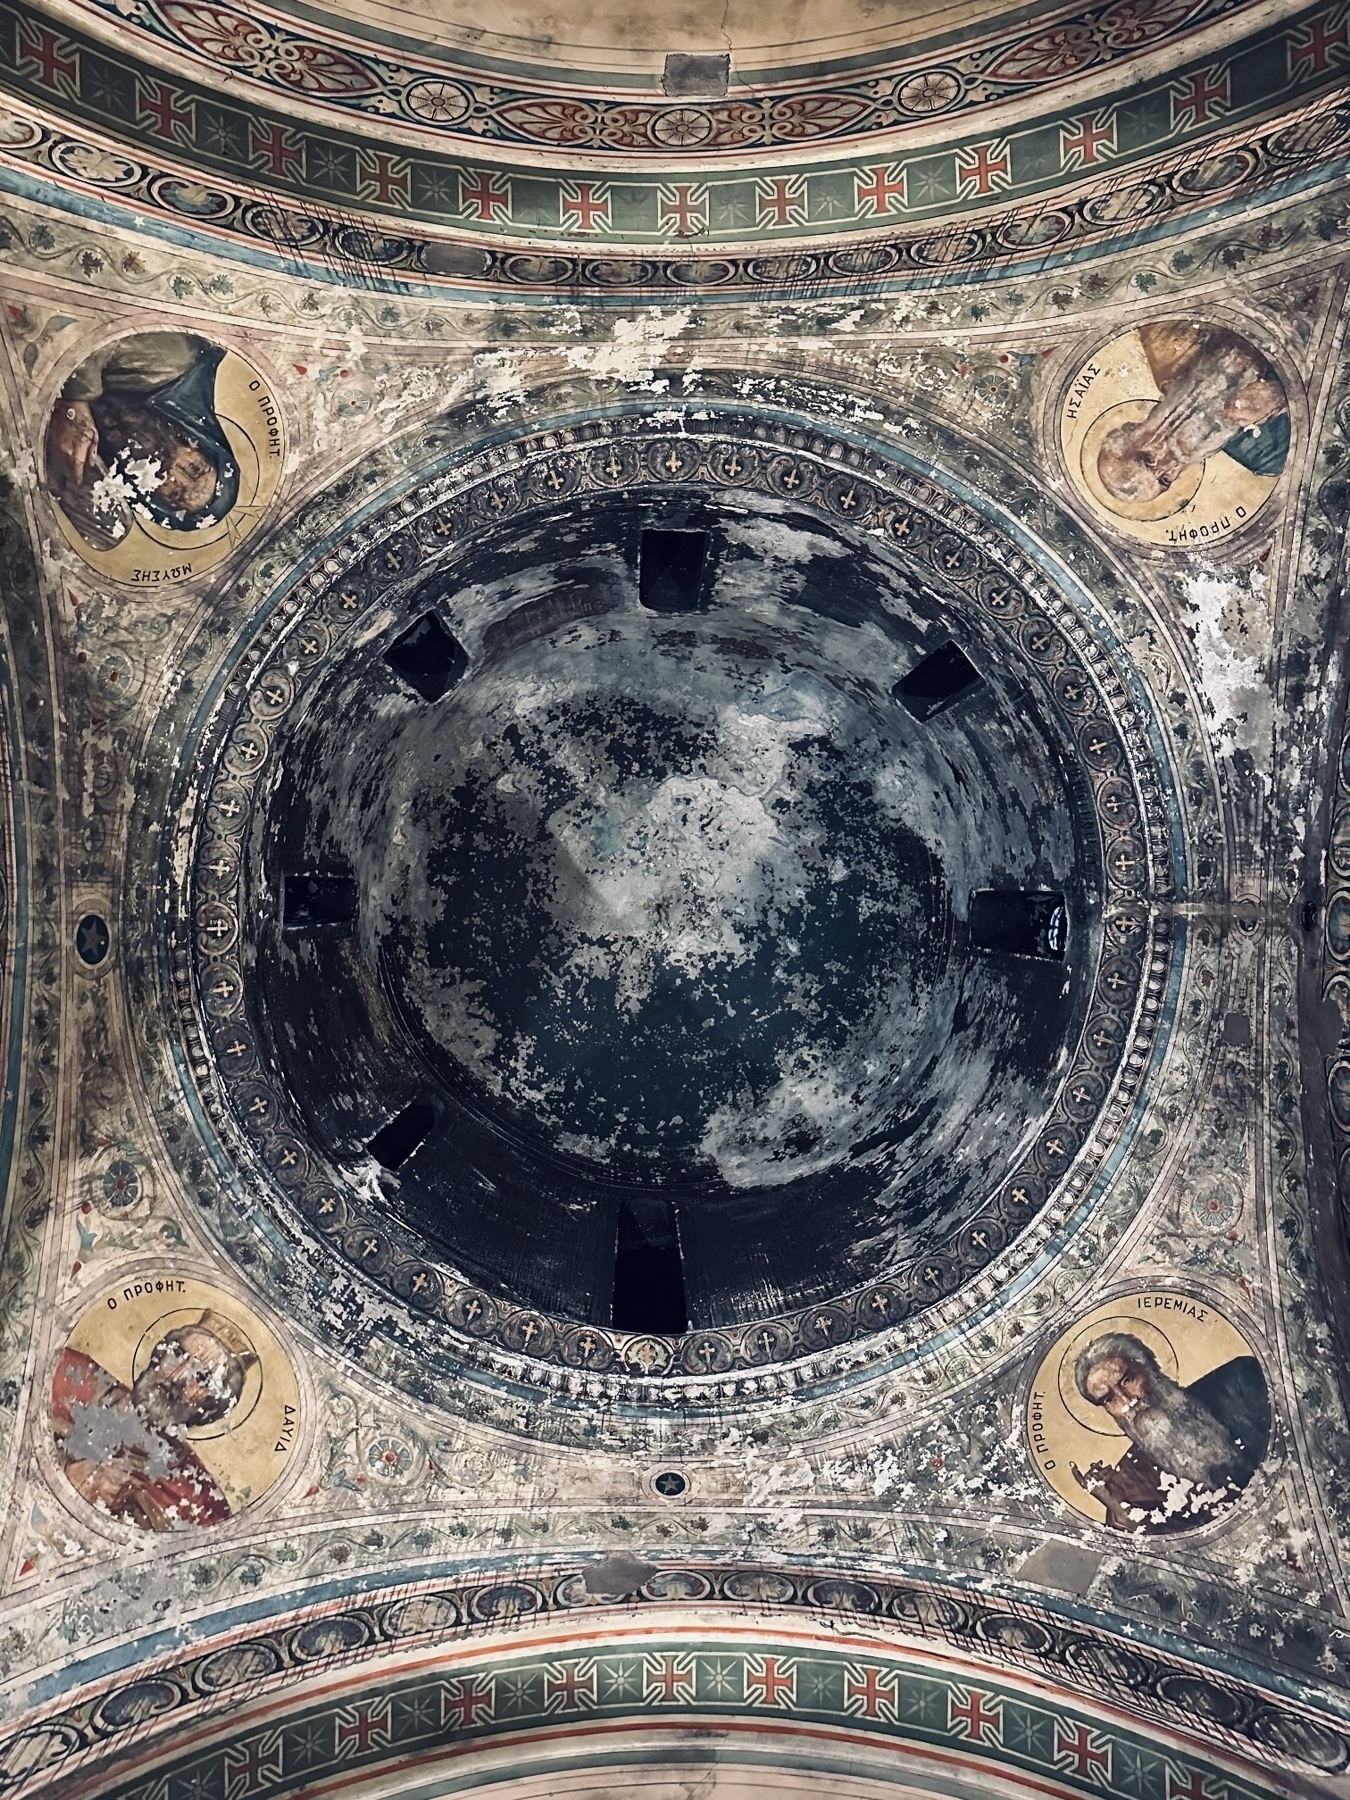 Looking directly up at the inside of a dome, painted dark but with flaking paint and religious paintings around the outside.